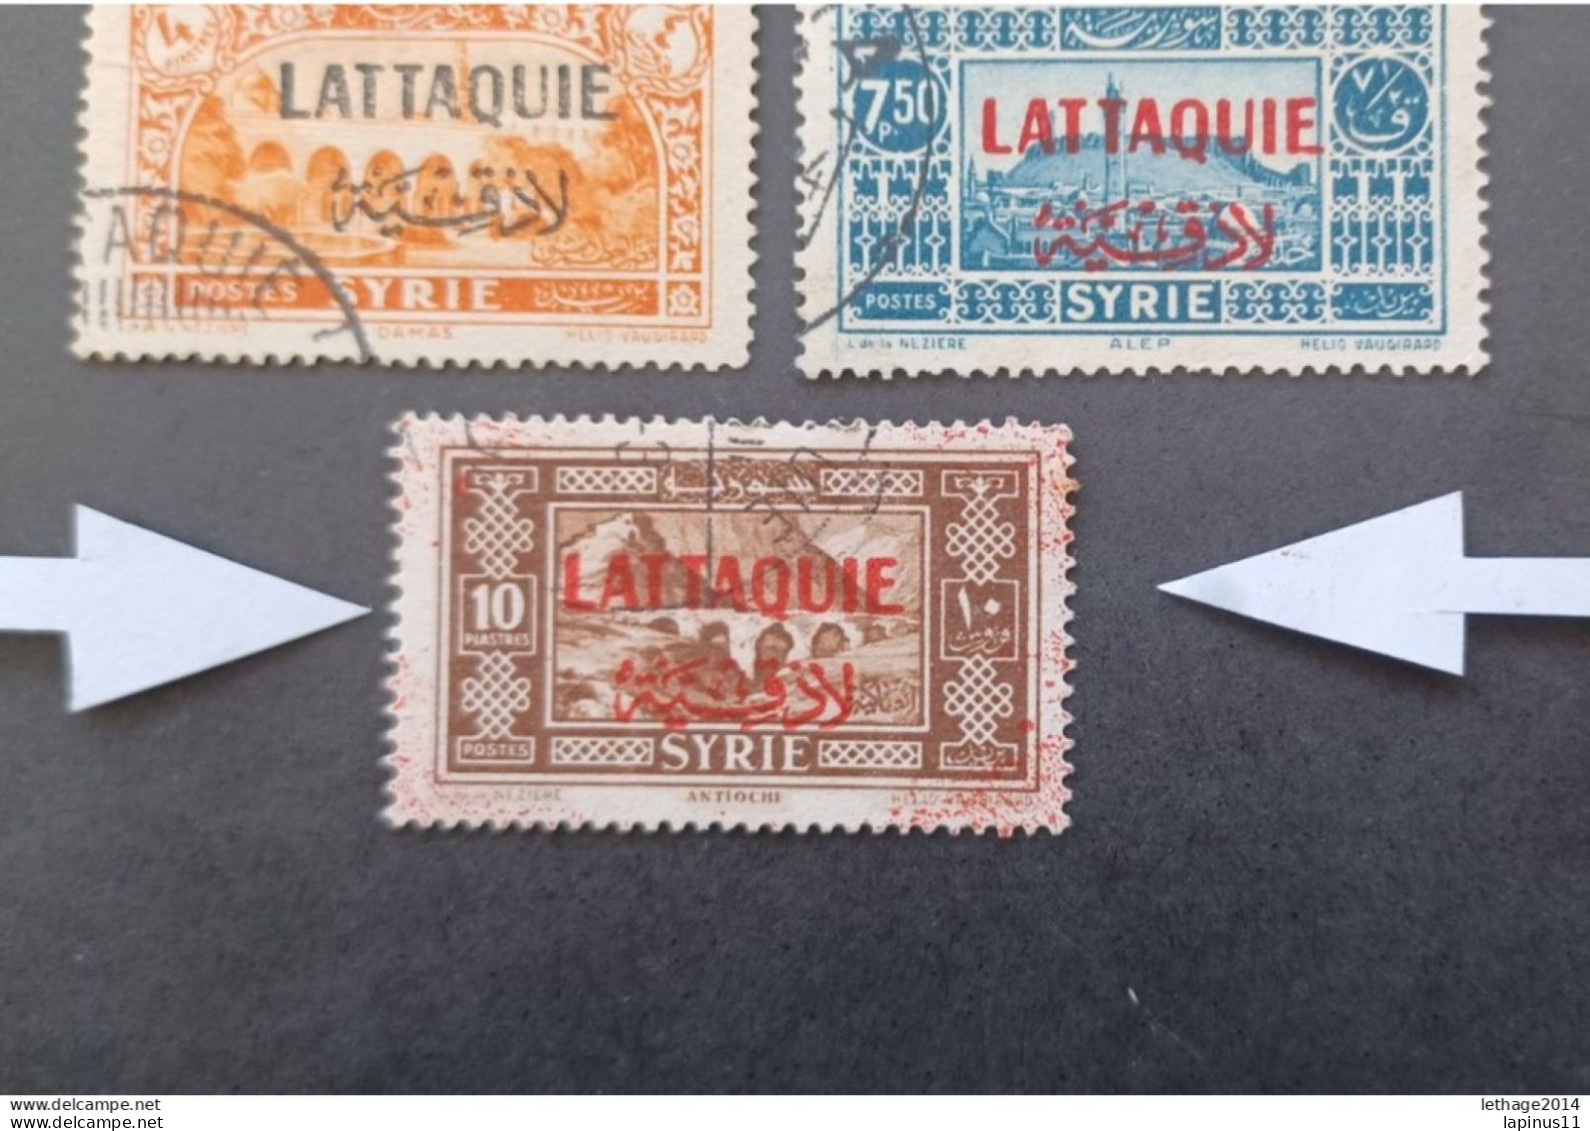 FRENCH OCCUPATION IN SYRIA LATTAQUIE 1940 STAMPS OF SYRIE DE 1930 IN OVERPRINT CAT YVERT N 1....15 RED STAINS - Gebraucht